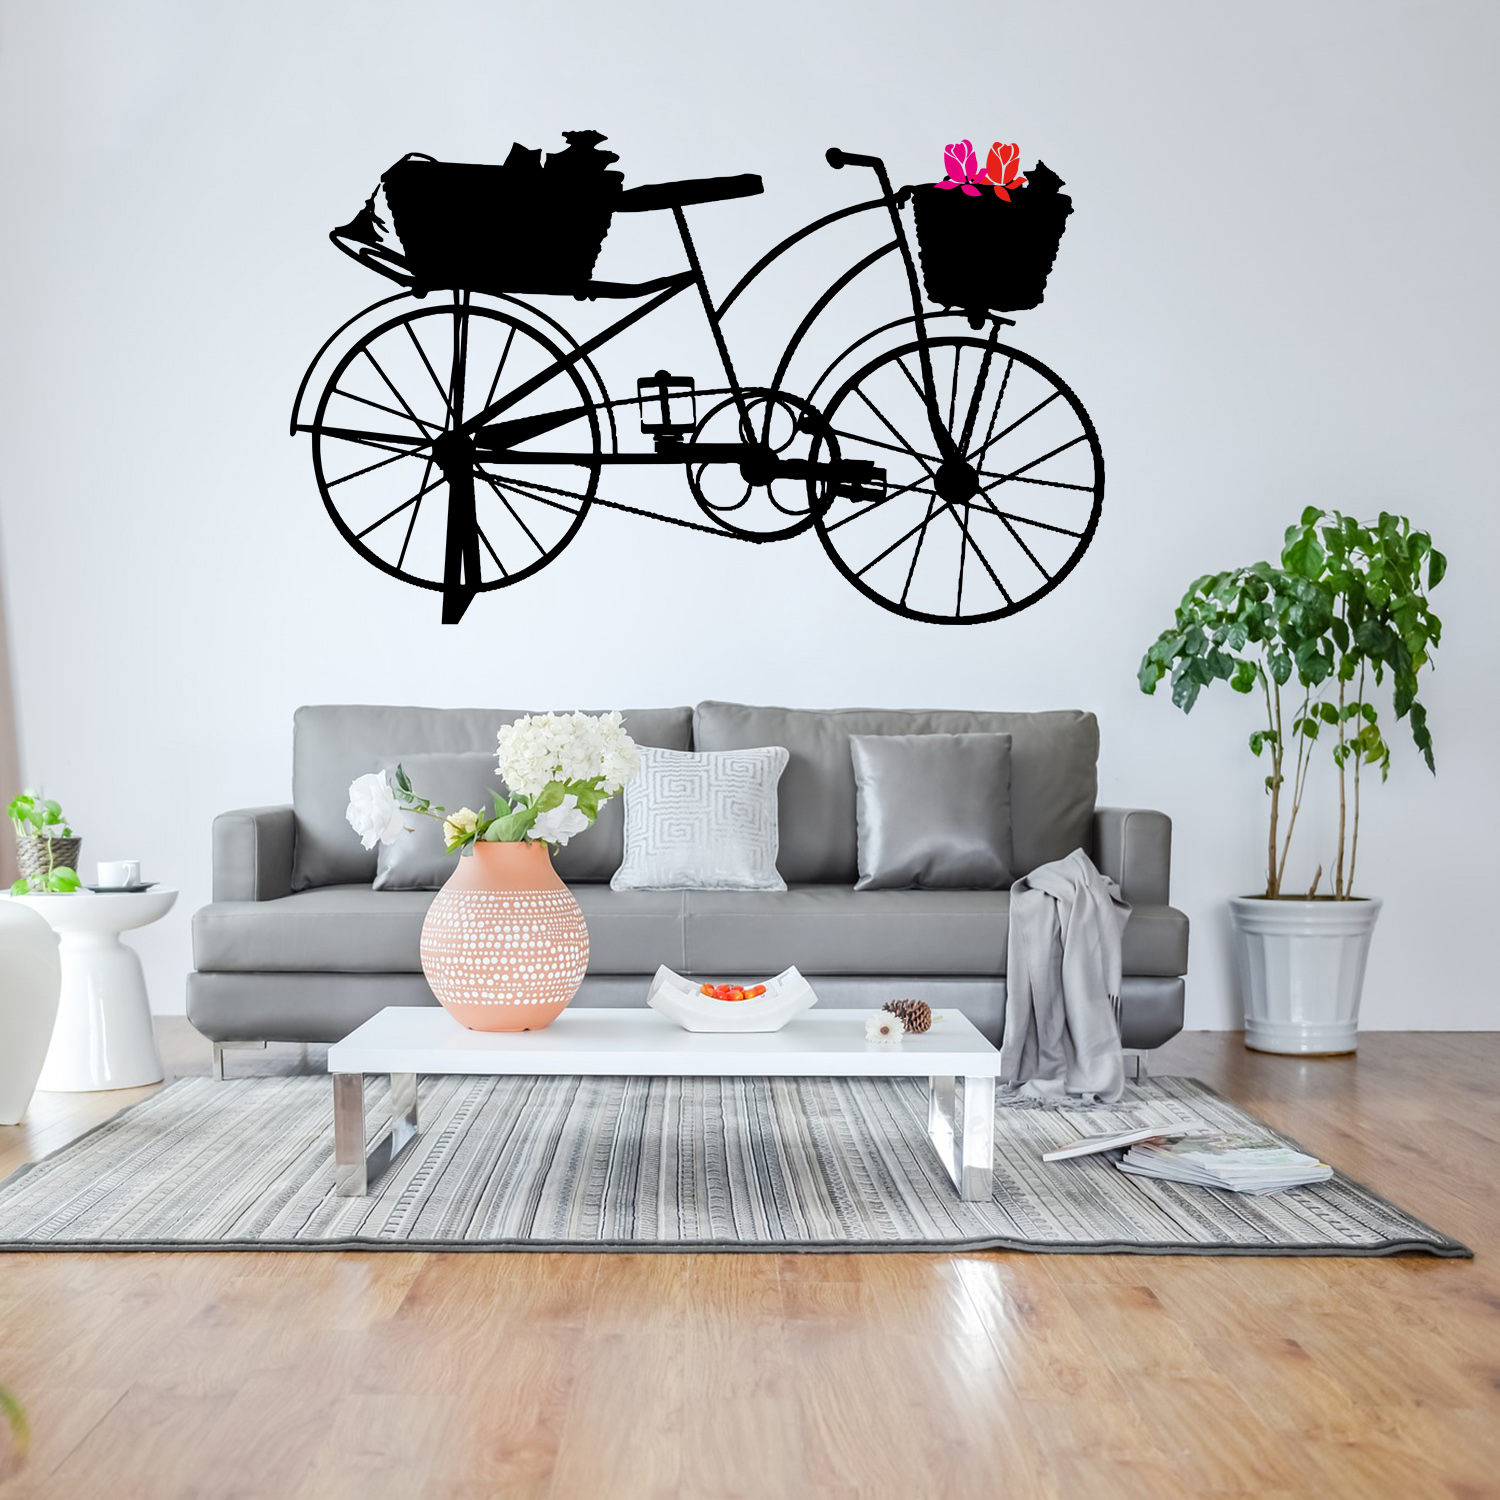 Design Your Own Vinyl Wall Stickers